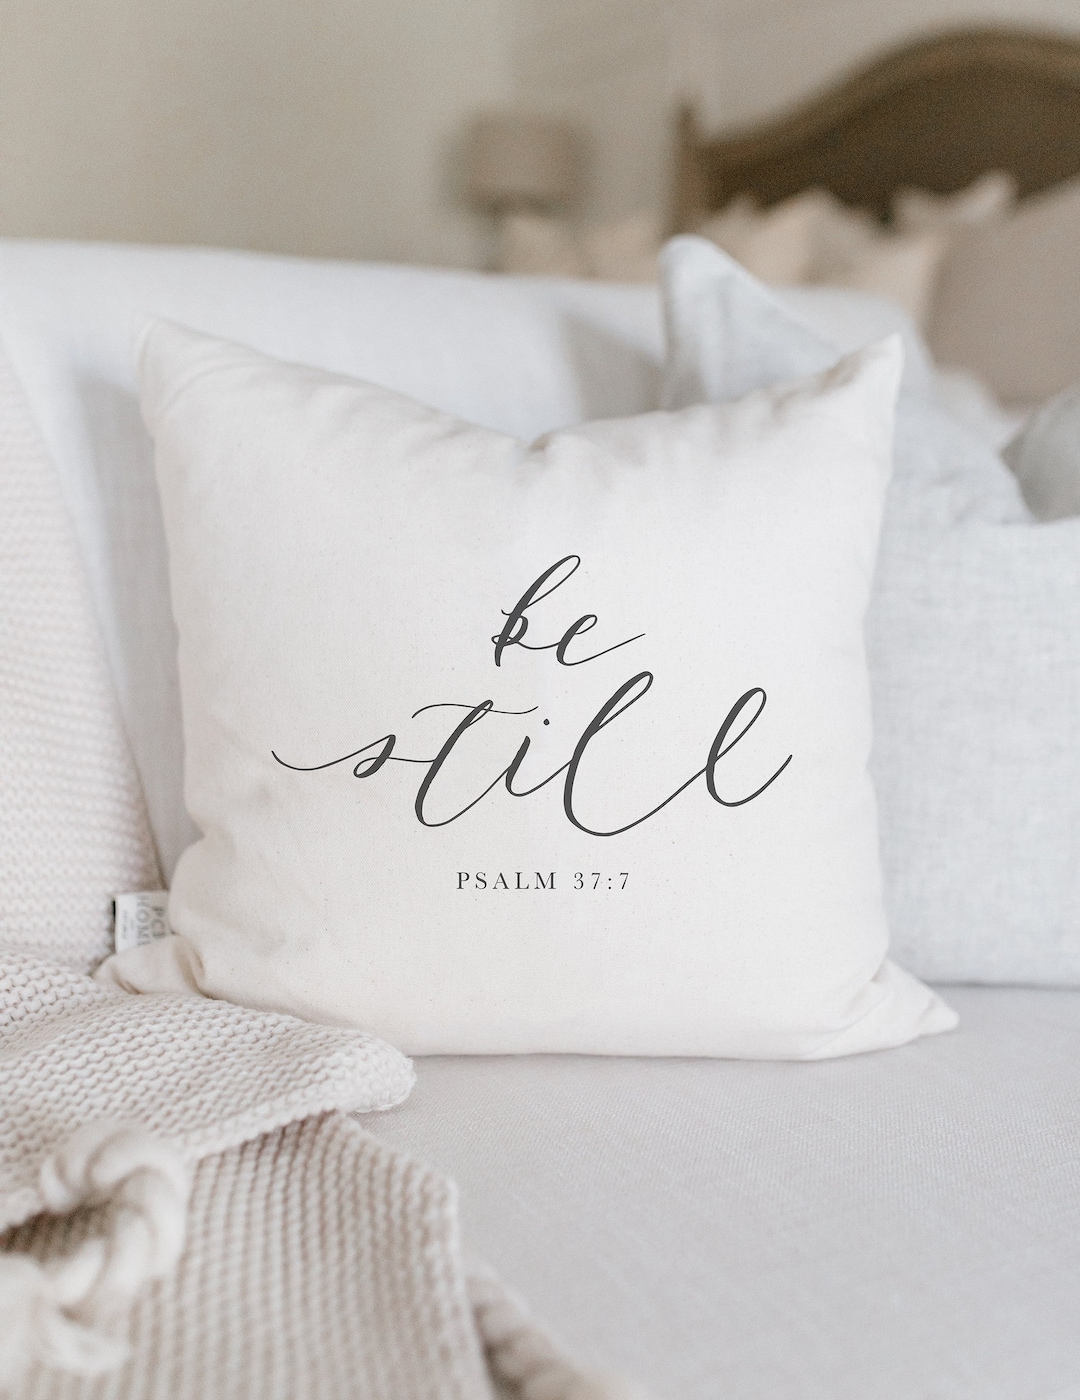 How to make Large Custom Pillows with Cricut - 100 Directions